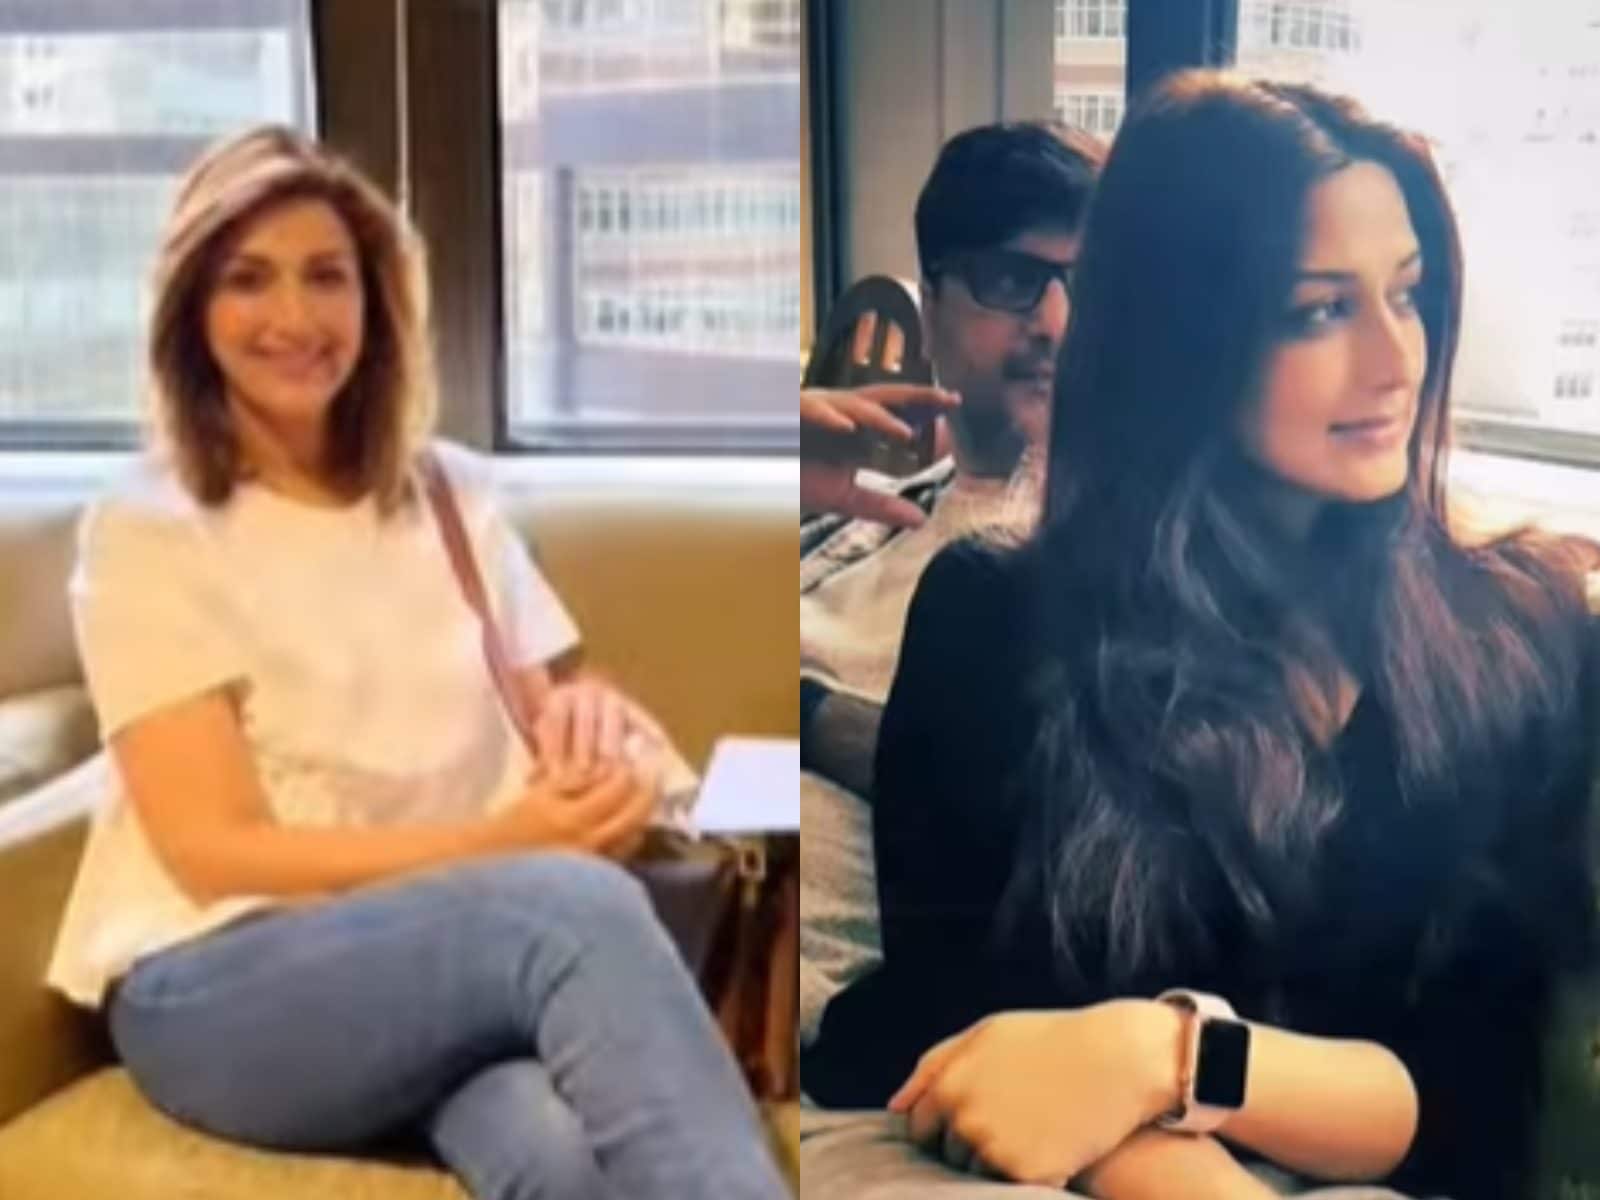 Sonali Bendre Xxx Video Big Boobs - Emotional Sonali Bendre Revisits Hospital Where She Was Treated for Cancer:  'It Was Bittersweet' - News18